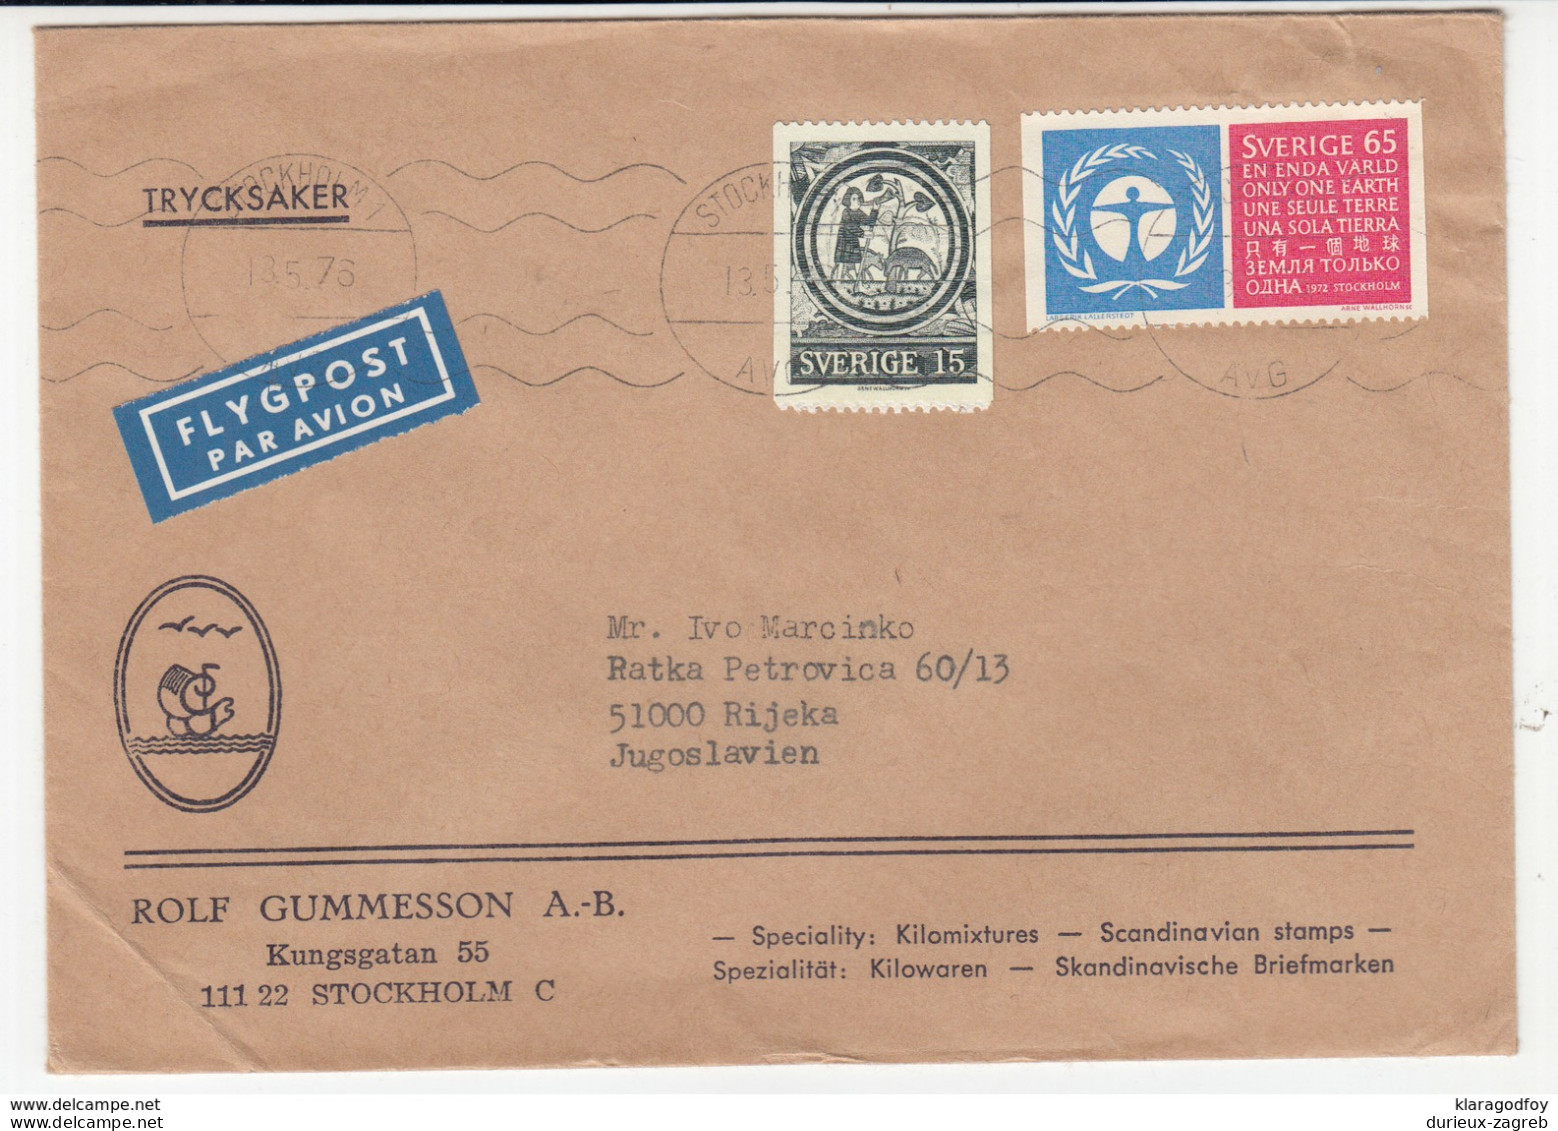 Sweden, Rolf Gummesson Company Letter Cover Airmail Travelled 1976 Stockholm Pmk B180220 - Covers & Documents